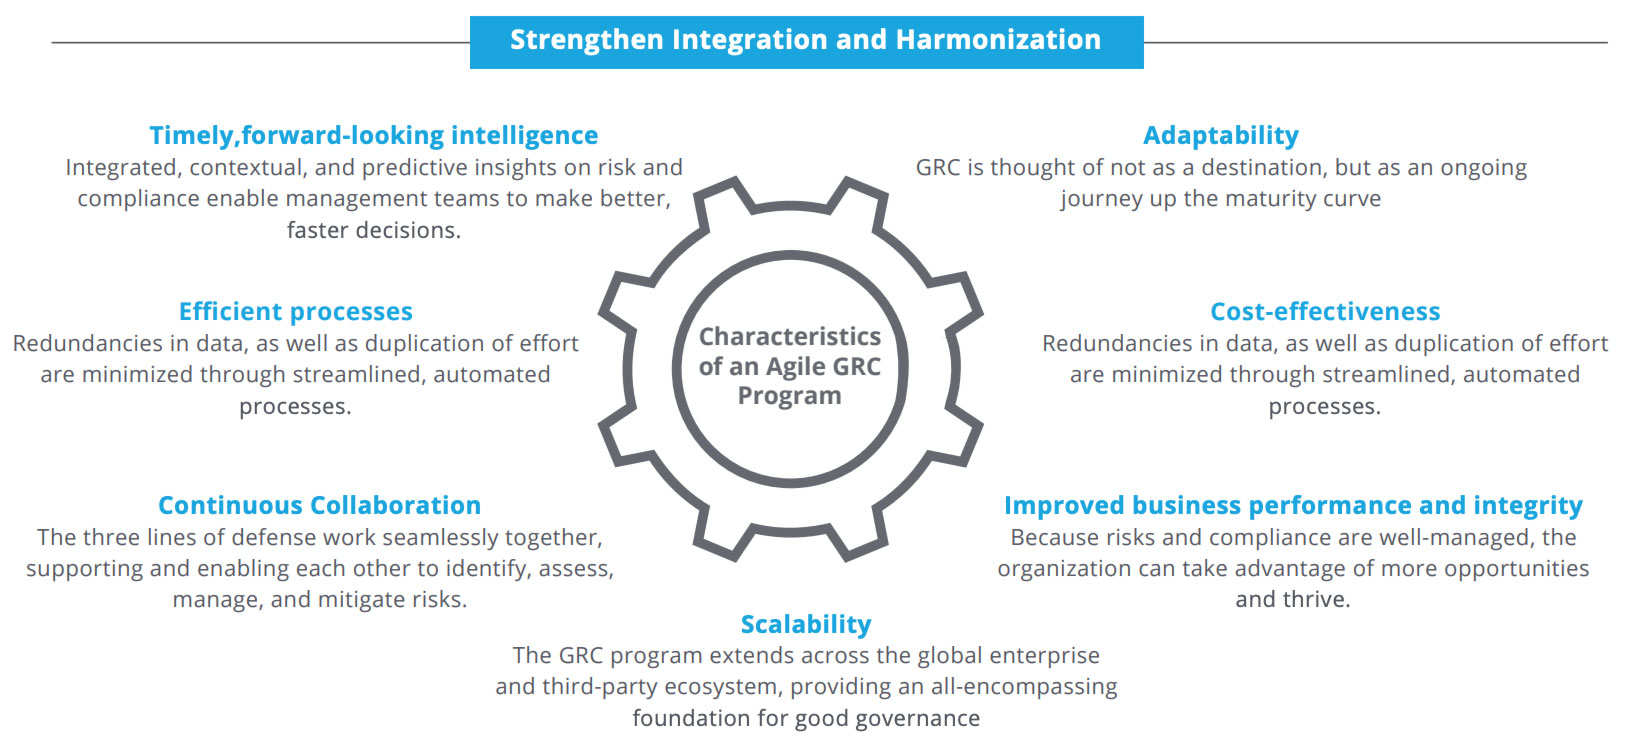 The power of agile integration